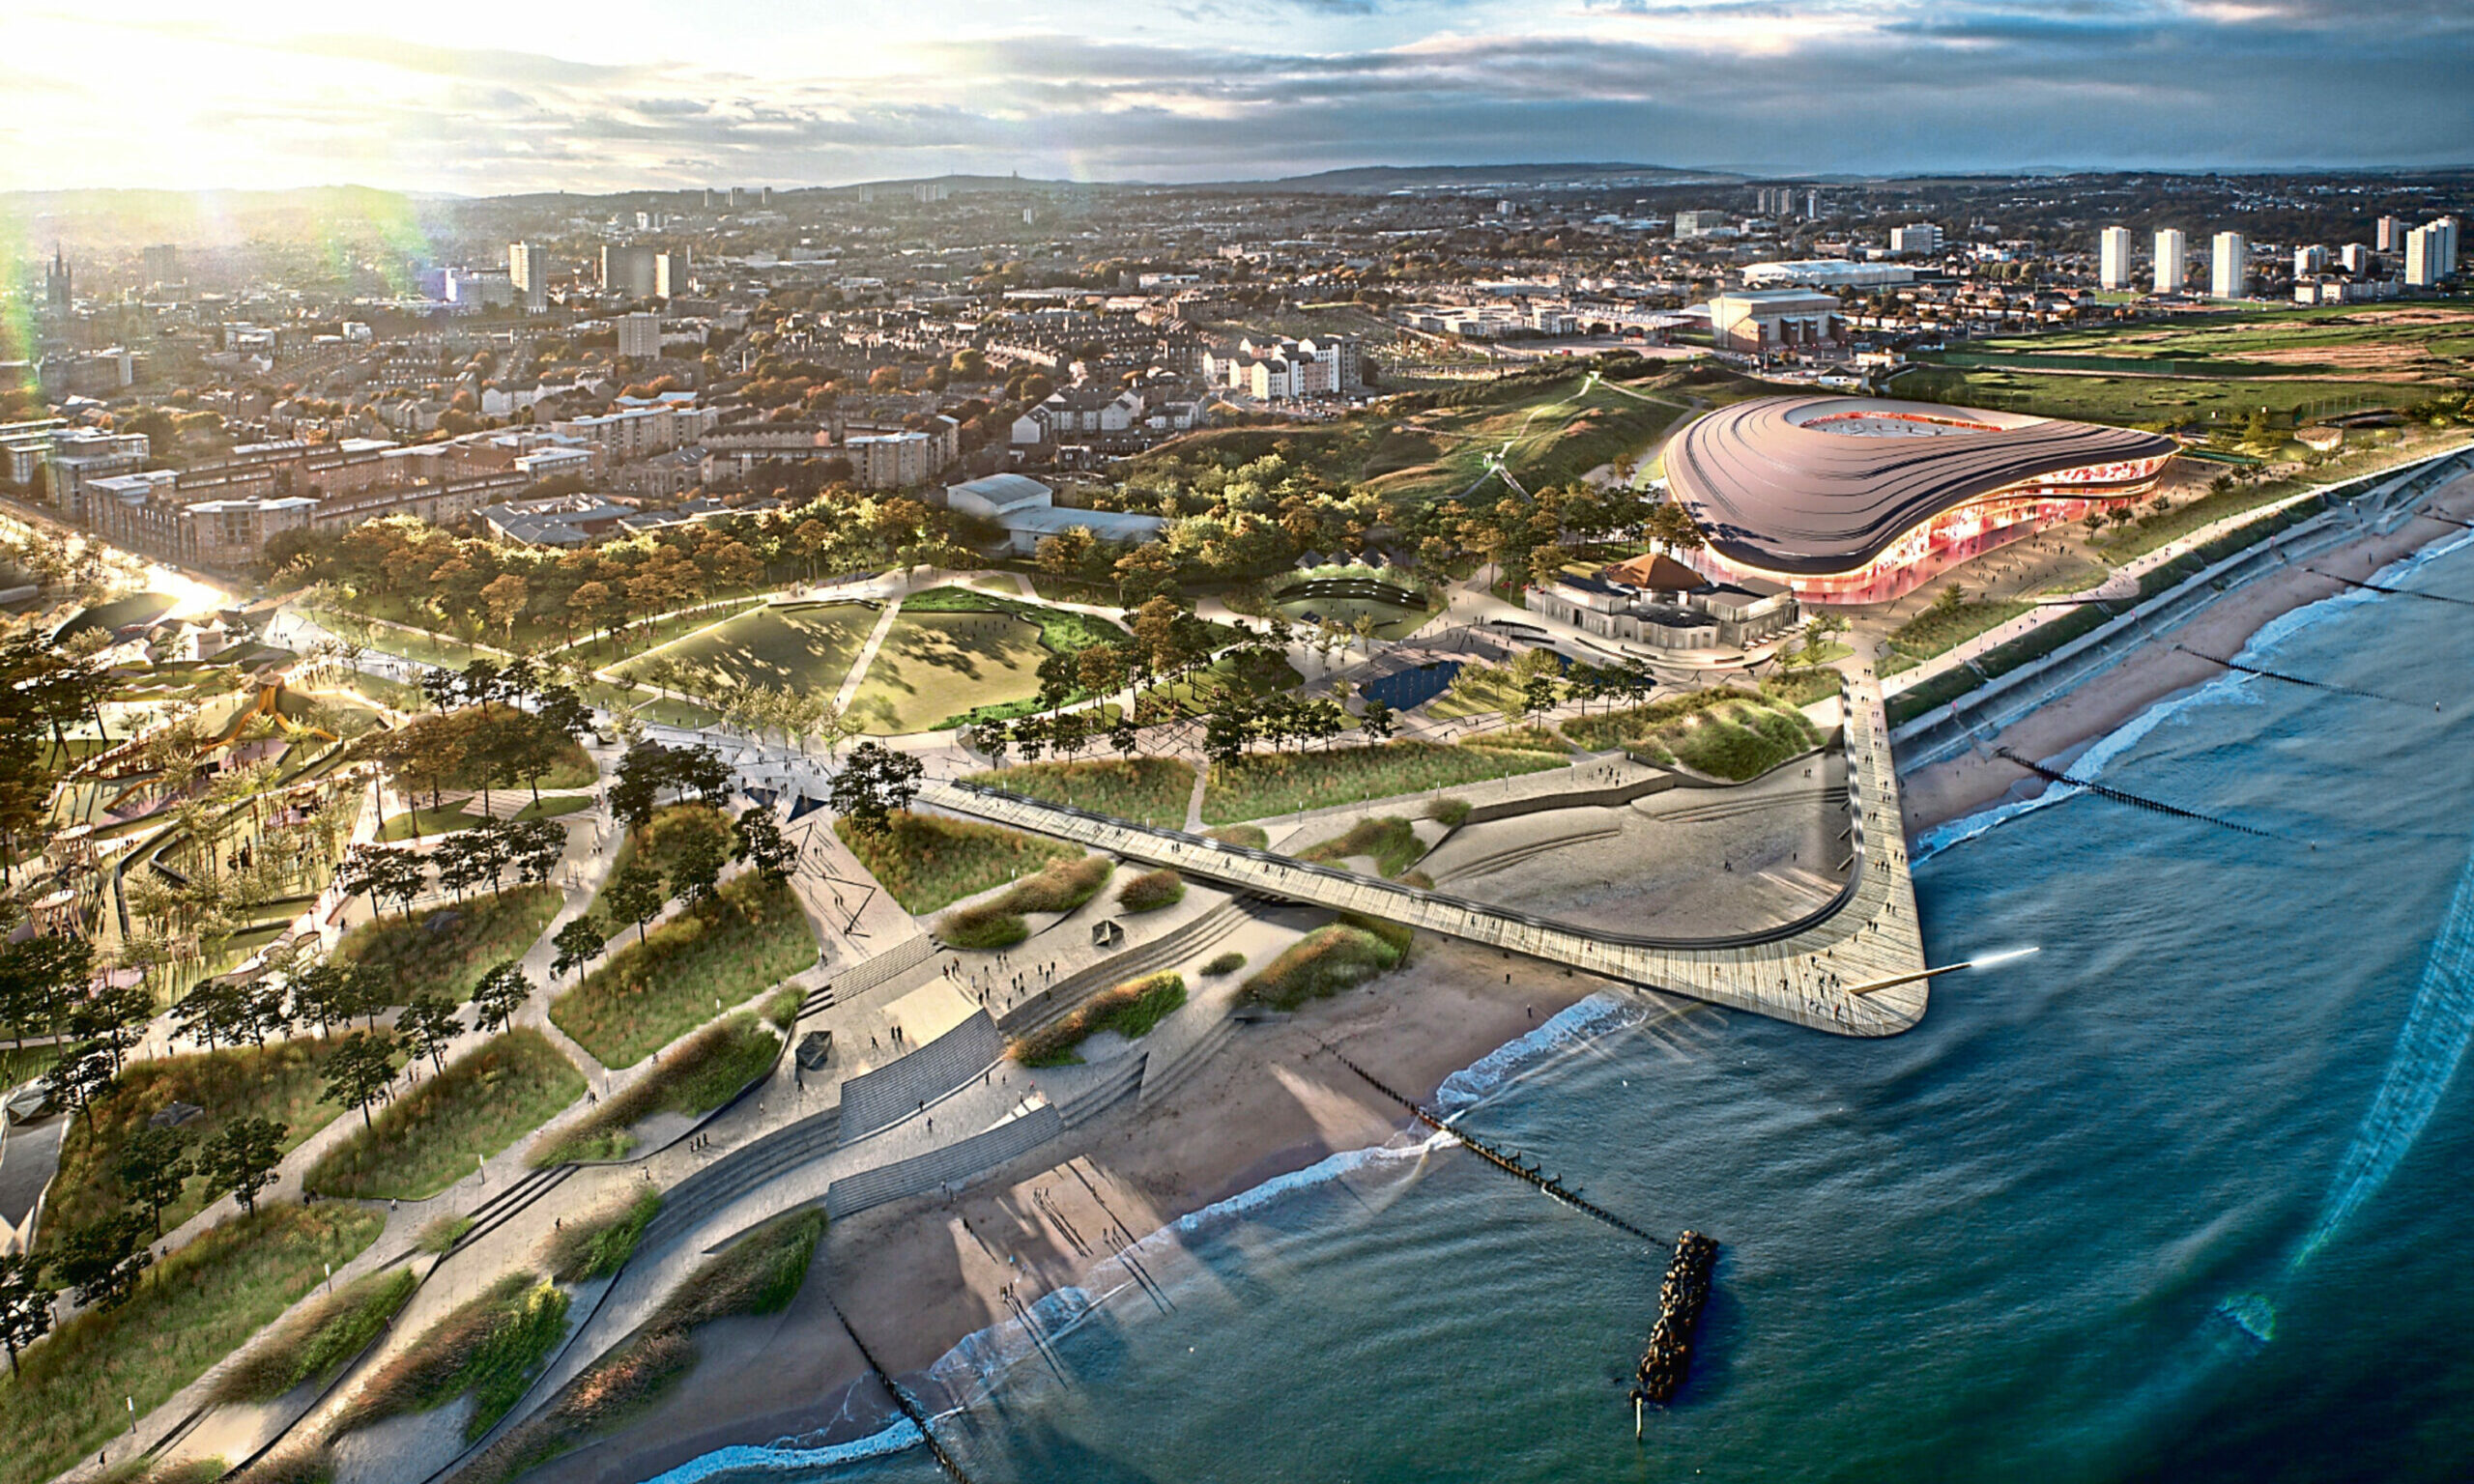 An image showing what the beach masterplan could look like. Supplied by Morrison Communications